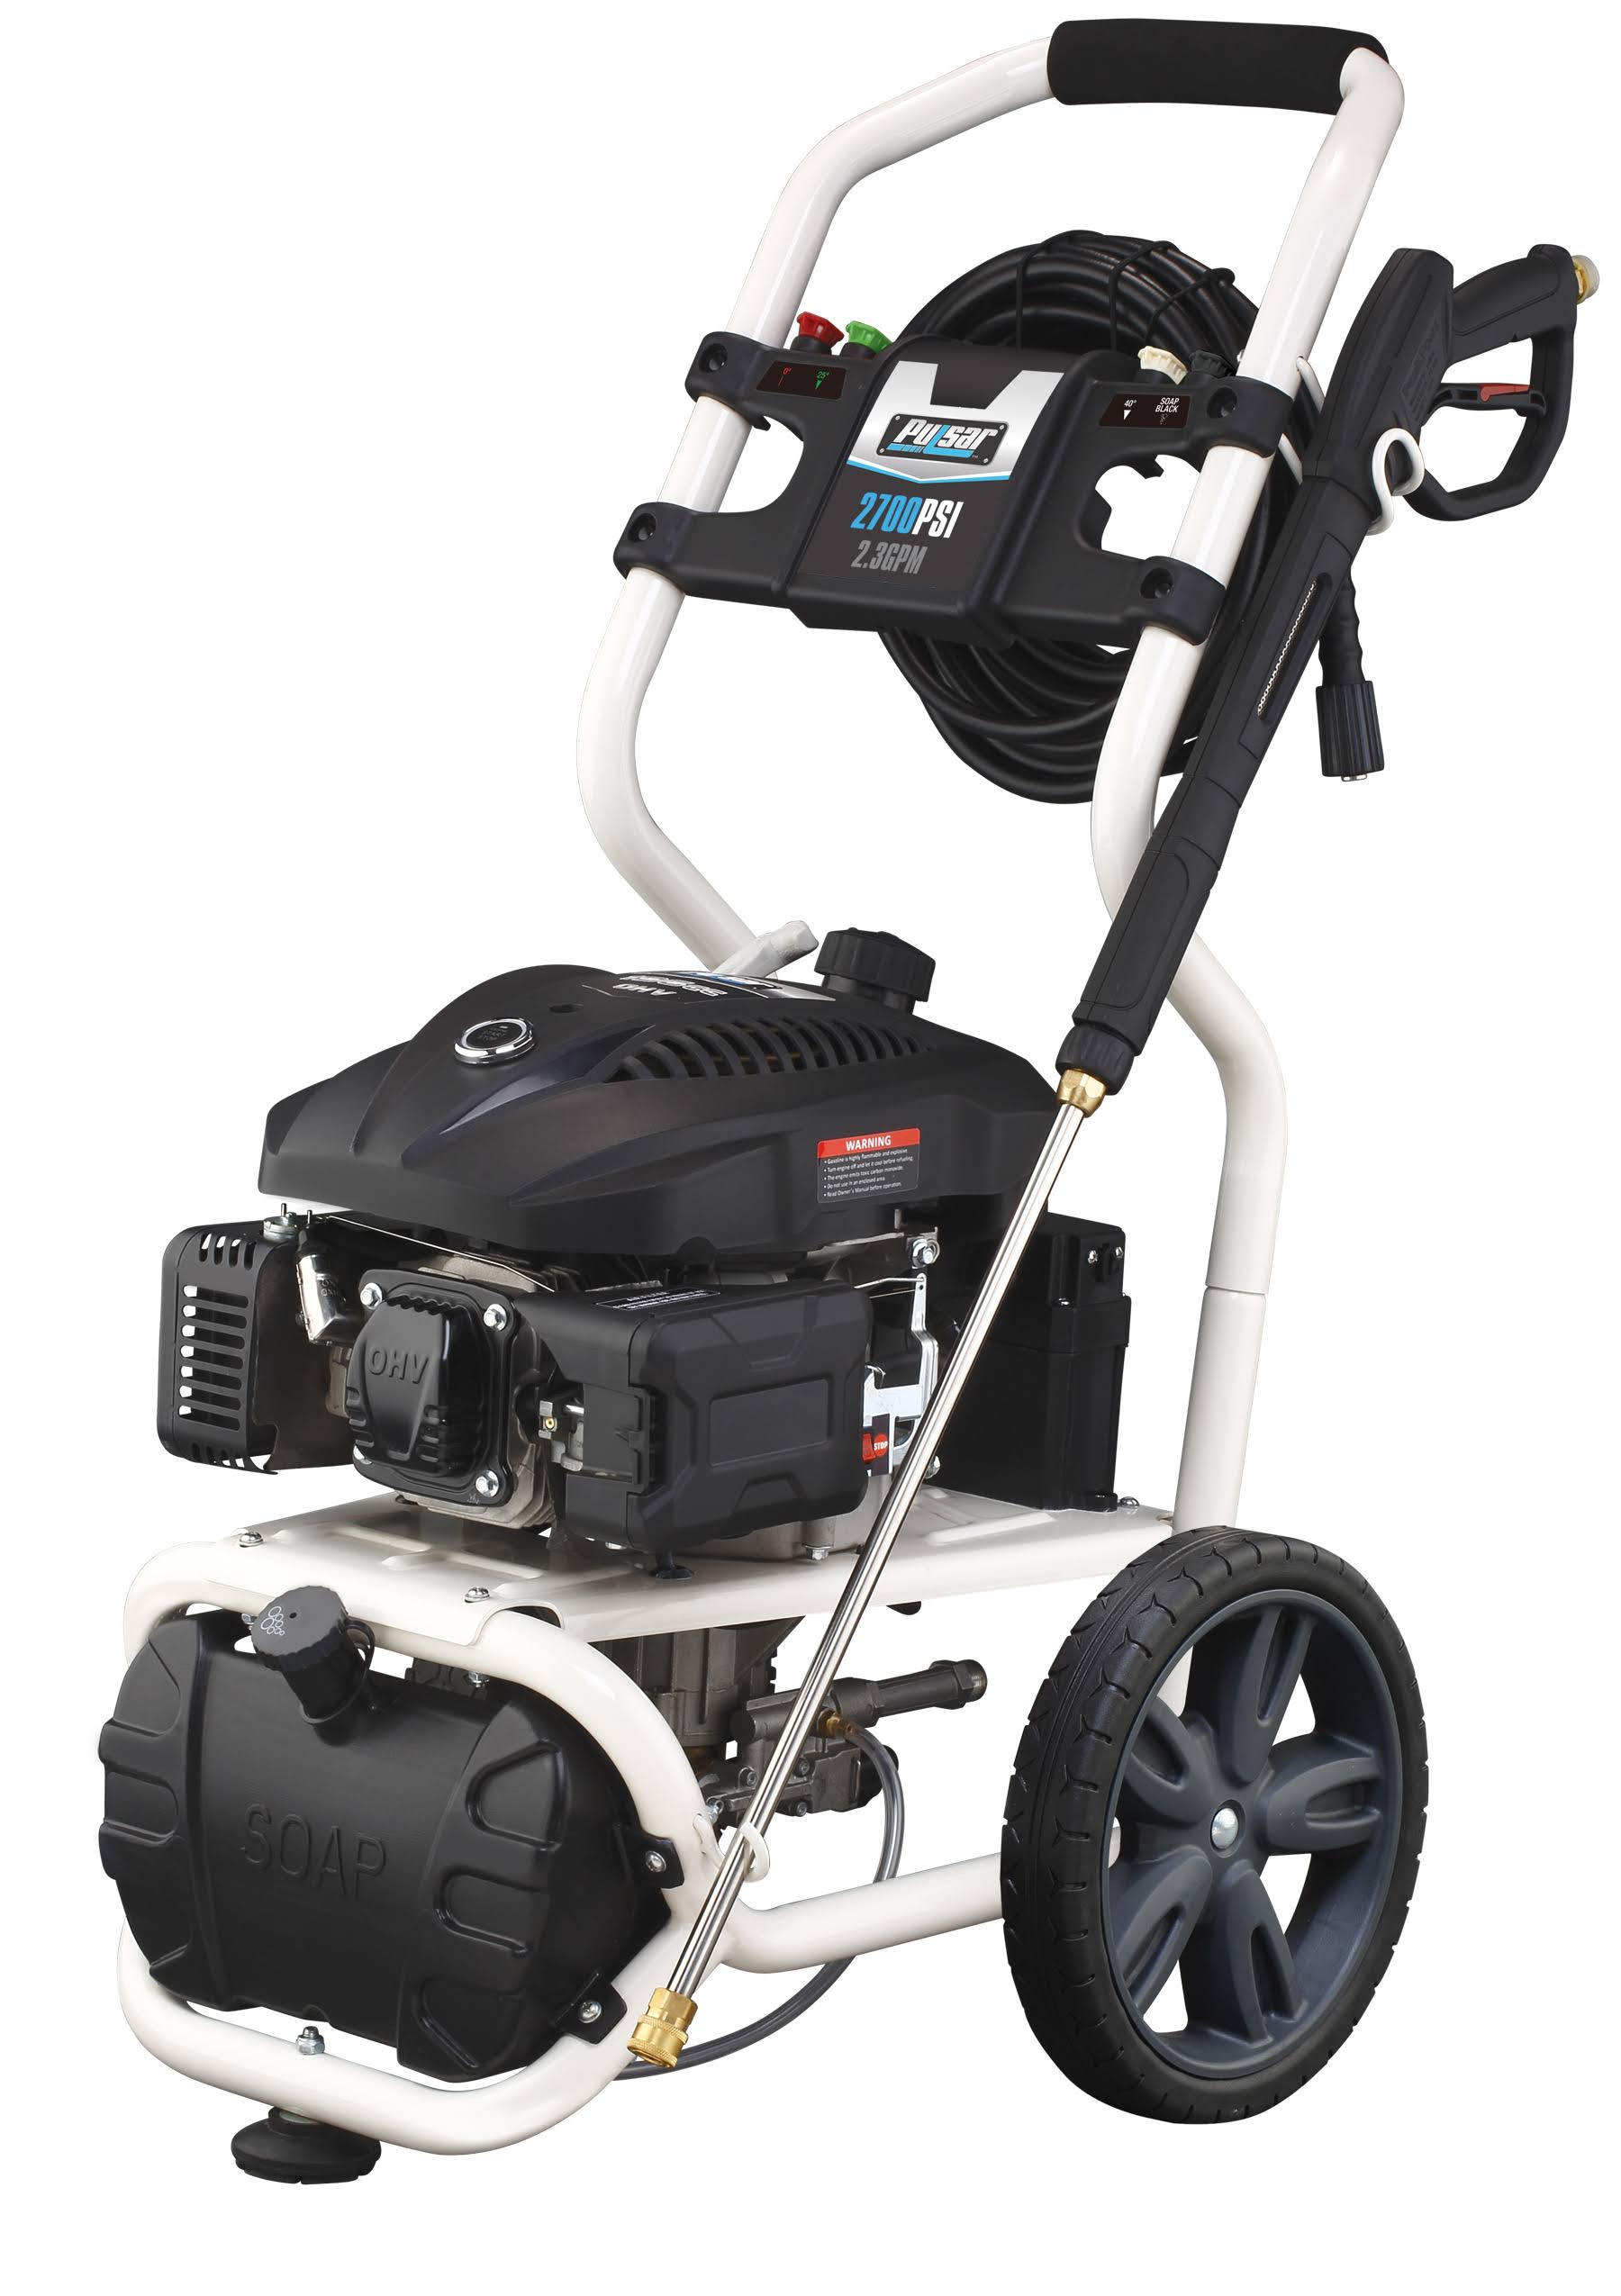 Pulsar 2700 PSI Pressure Washer with Electric Start